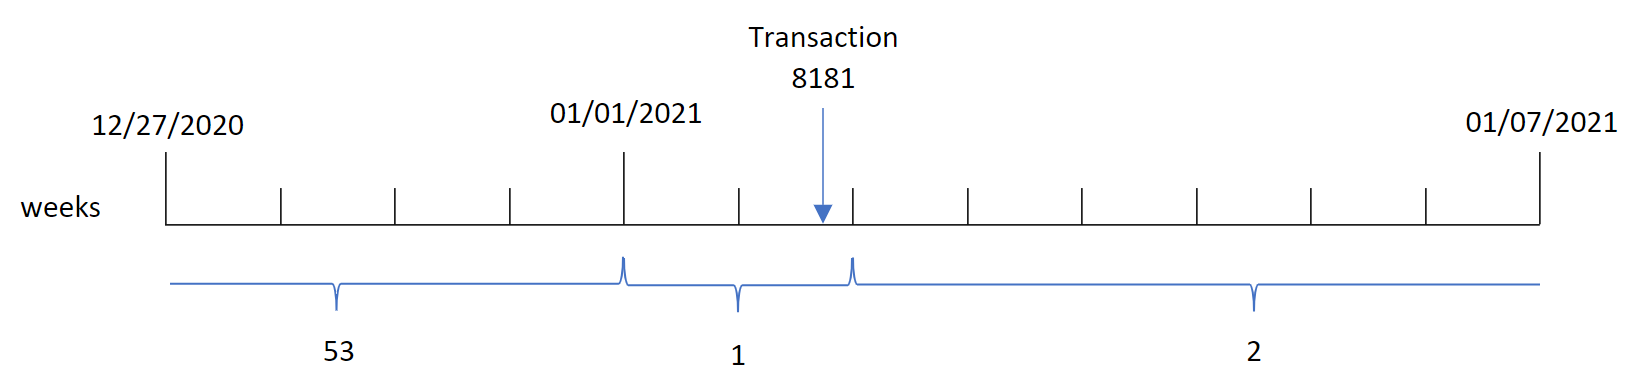 Diagram that shows the weekyear() function identifies that transaction 8181 took place in week 1 and returns the year of that week, 2021. 